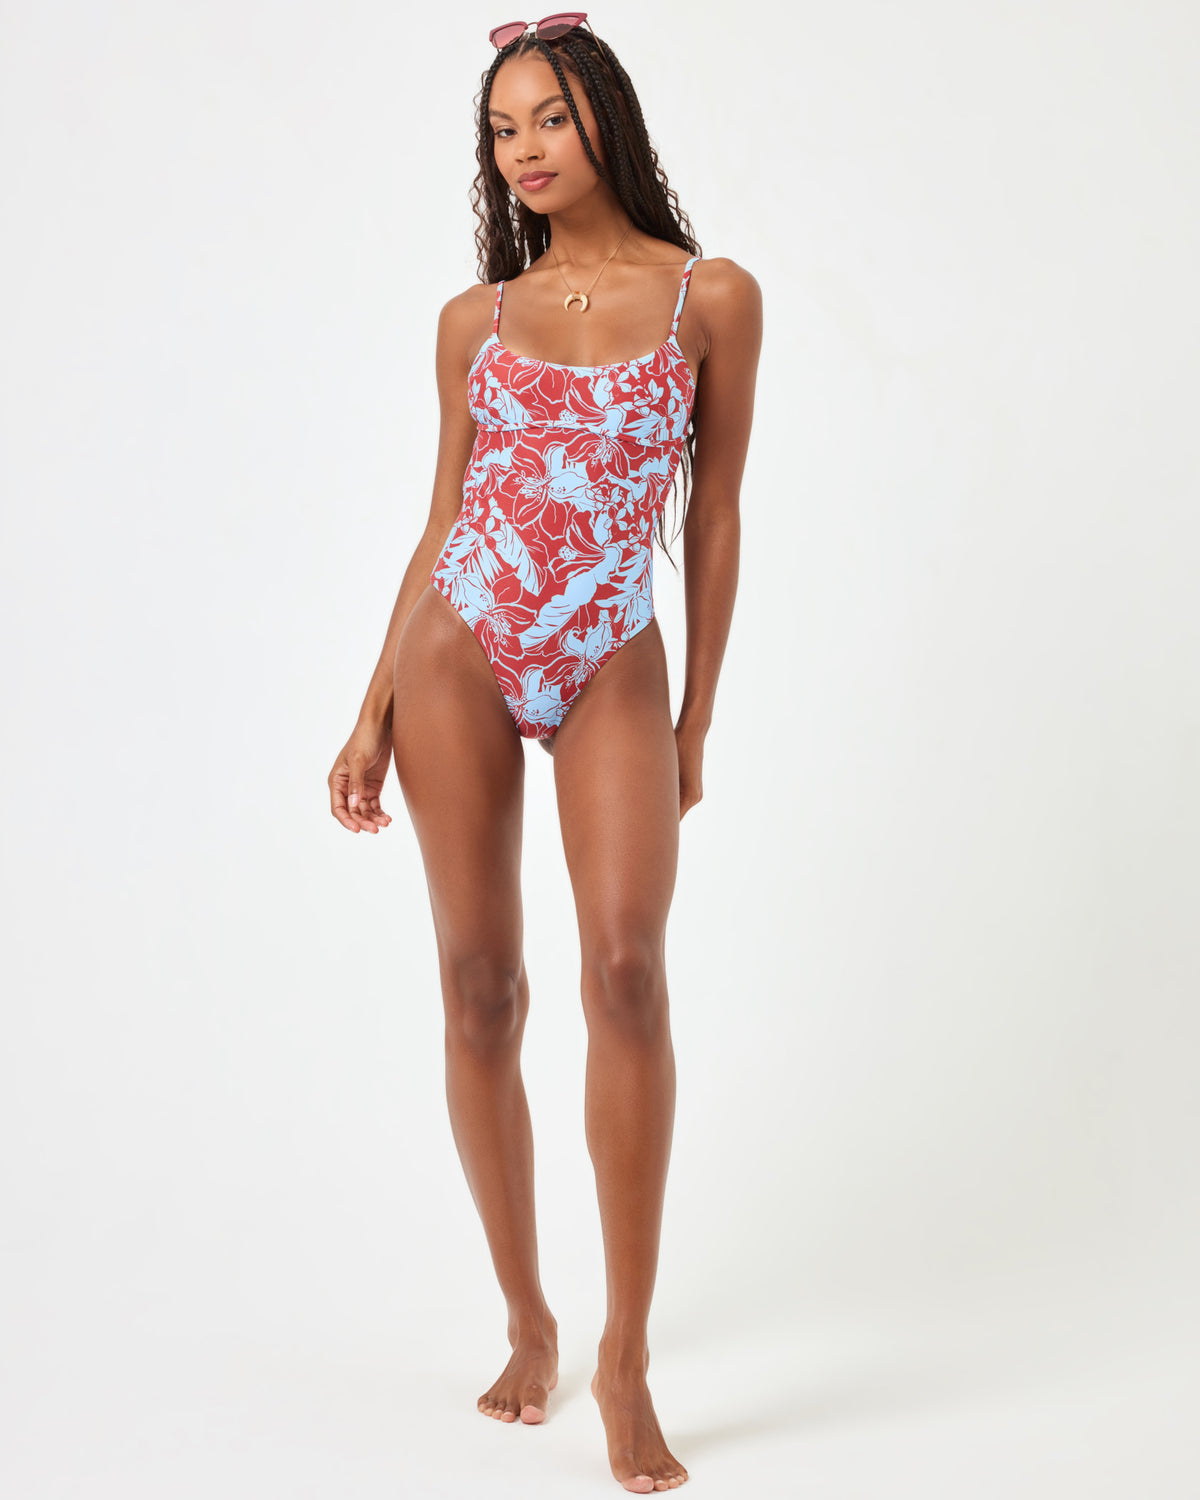 Eco Chic Econyl® Bree One Piece - Going Tropical Going Tropical | Model: Taelor (size: S)